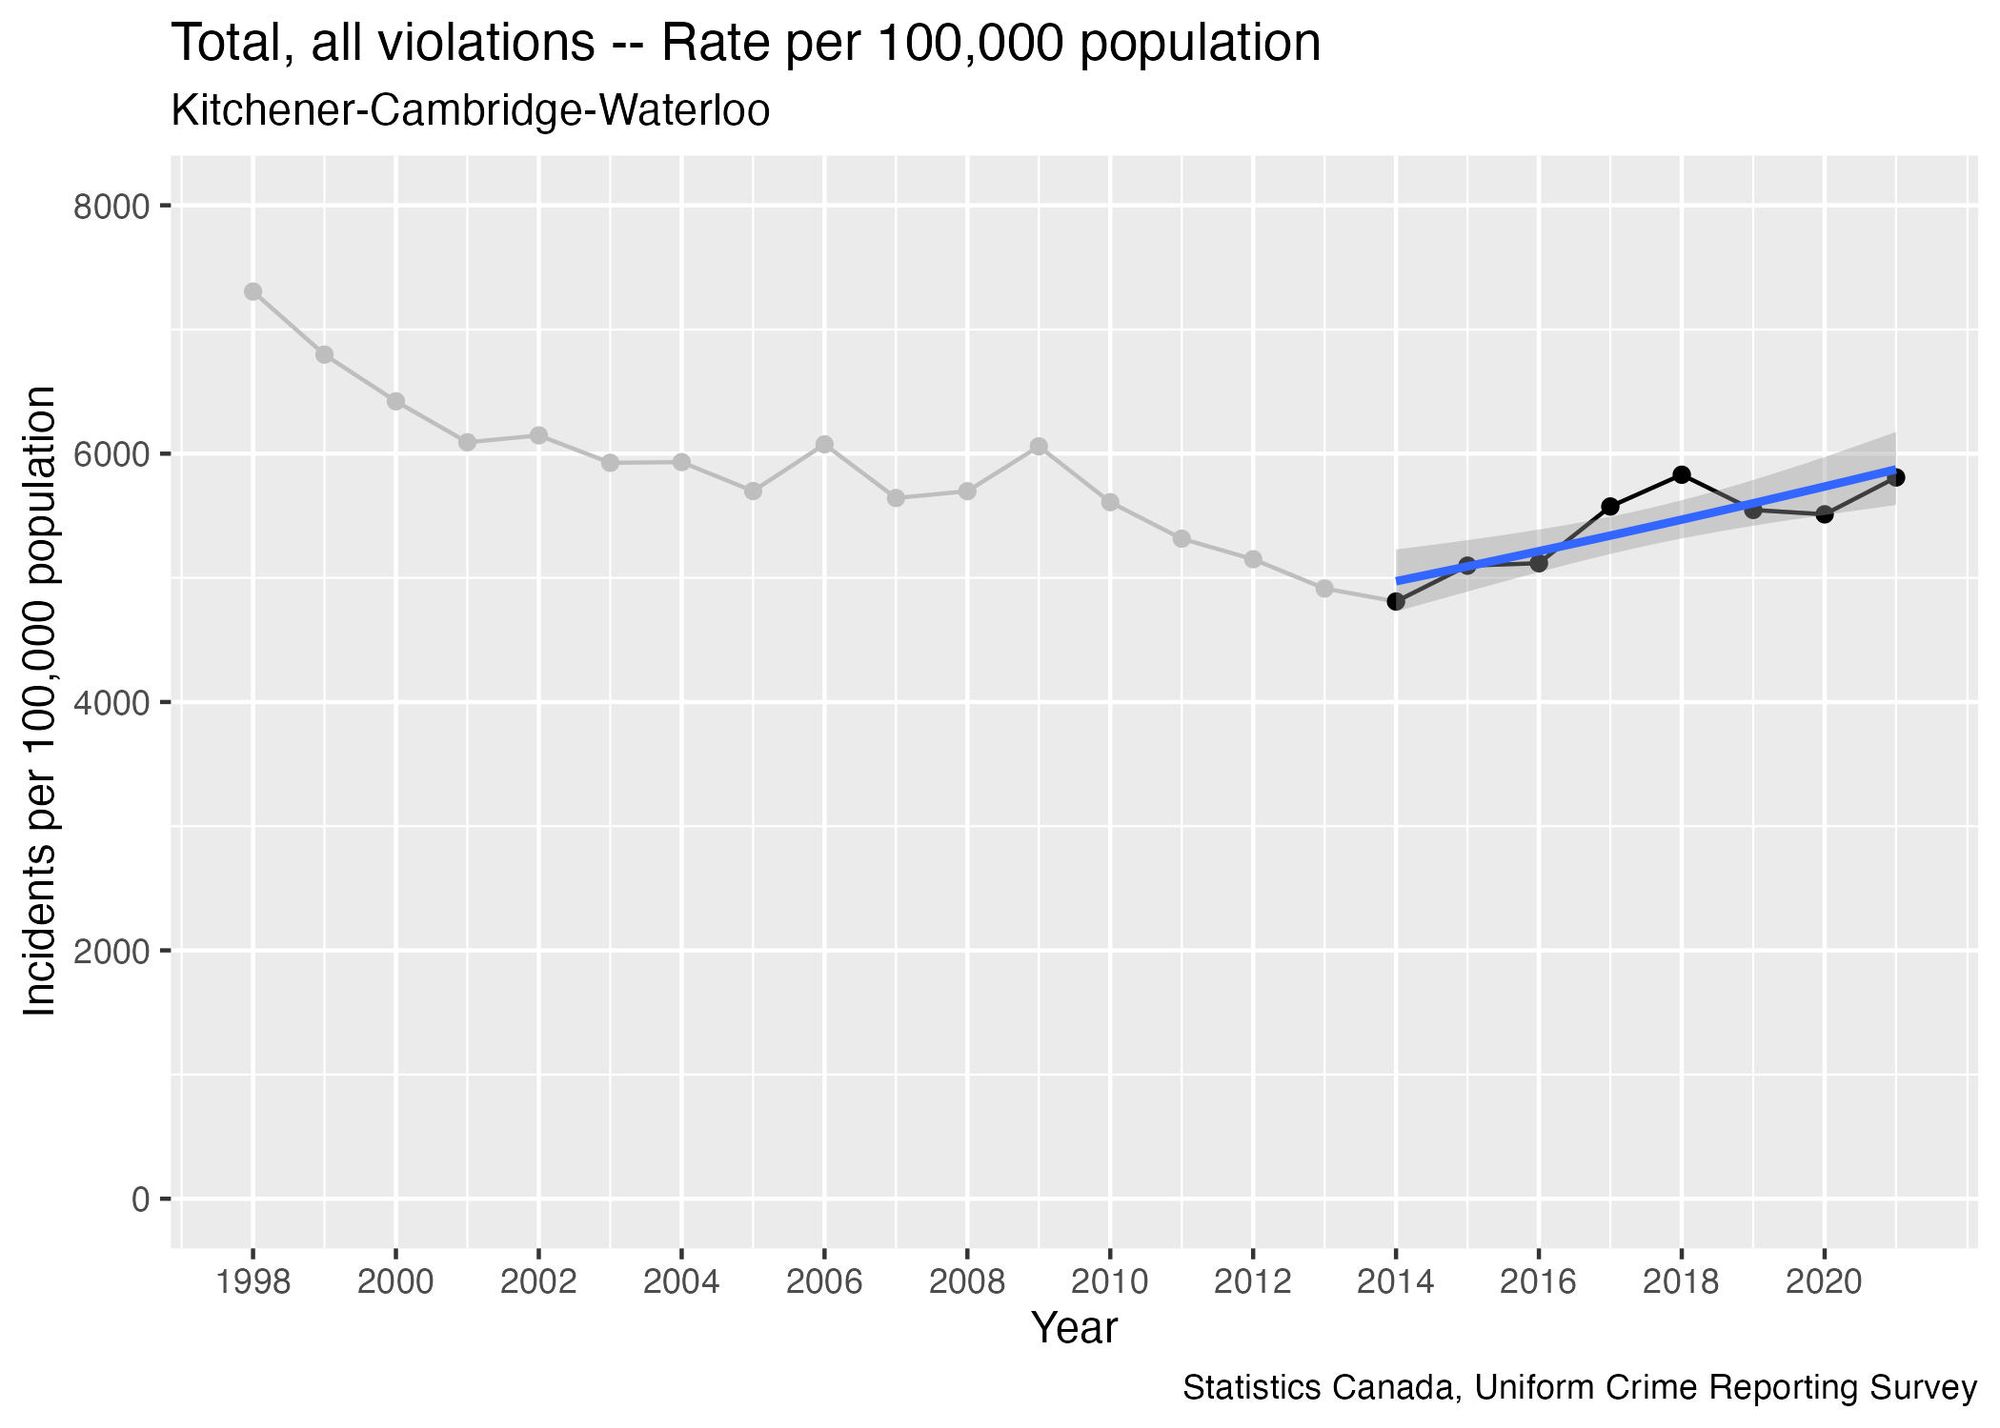 A graph of "Total, all violations - rate per 100,000 population" for Kitchener-Cambridge-Waterloo, between 1998 and 2021. Points from 1998 to 2013 have been greyed-out. The trend line on the years 2014 to 2021 is increasing.